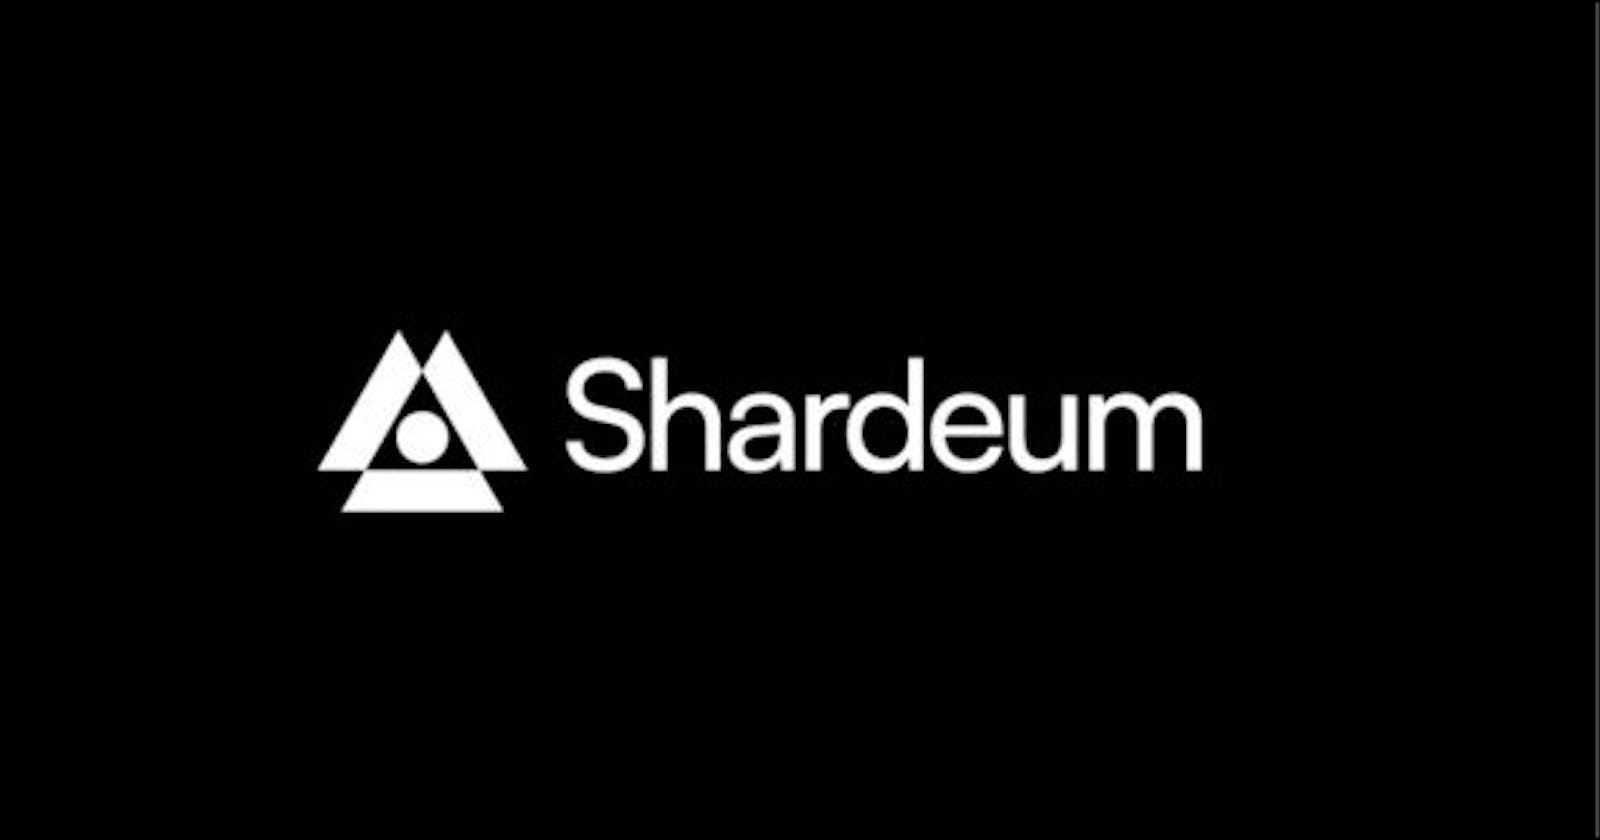 Shardeum’s Innovative Approach to Achieve Atomic and Cross Shard Composability